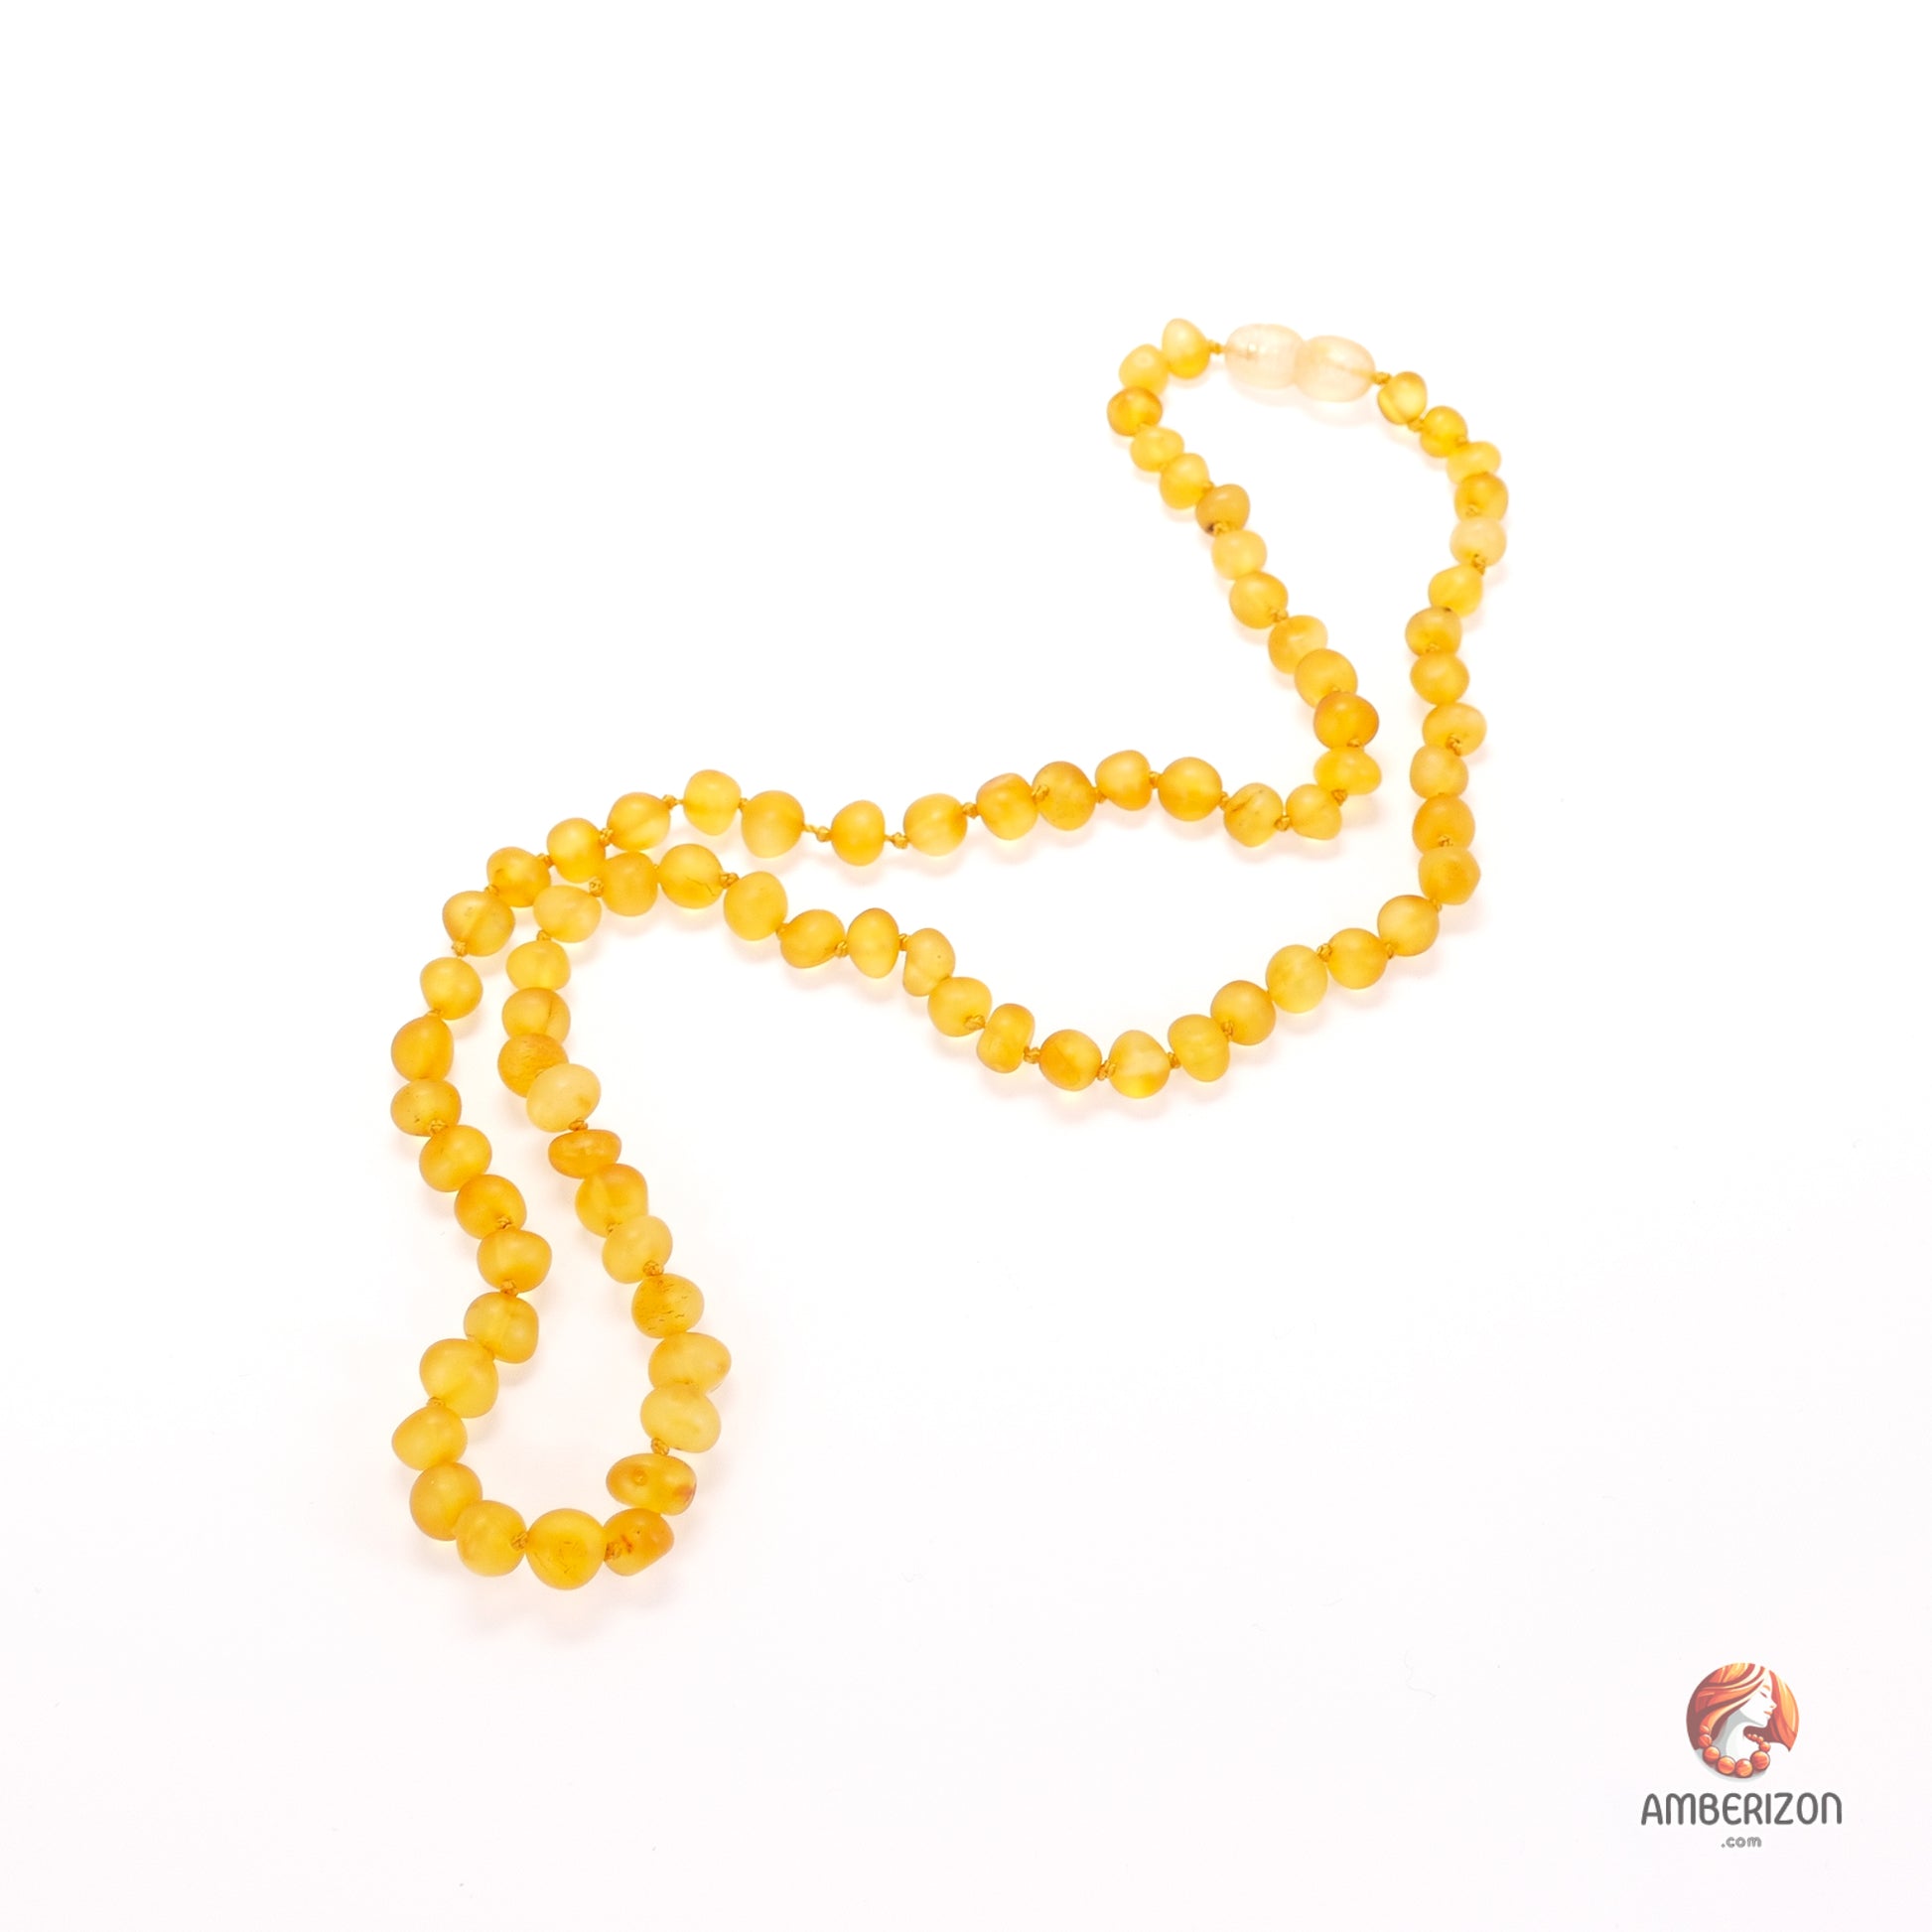 Raw Unpolished Baltic Amber Necklace in honey (yellow) color for Everyday Wear